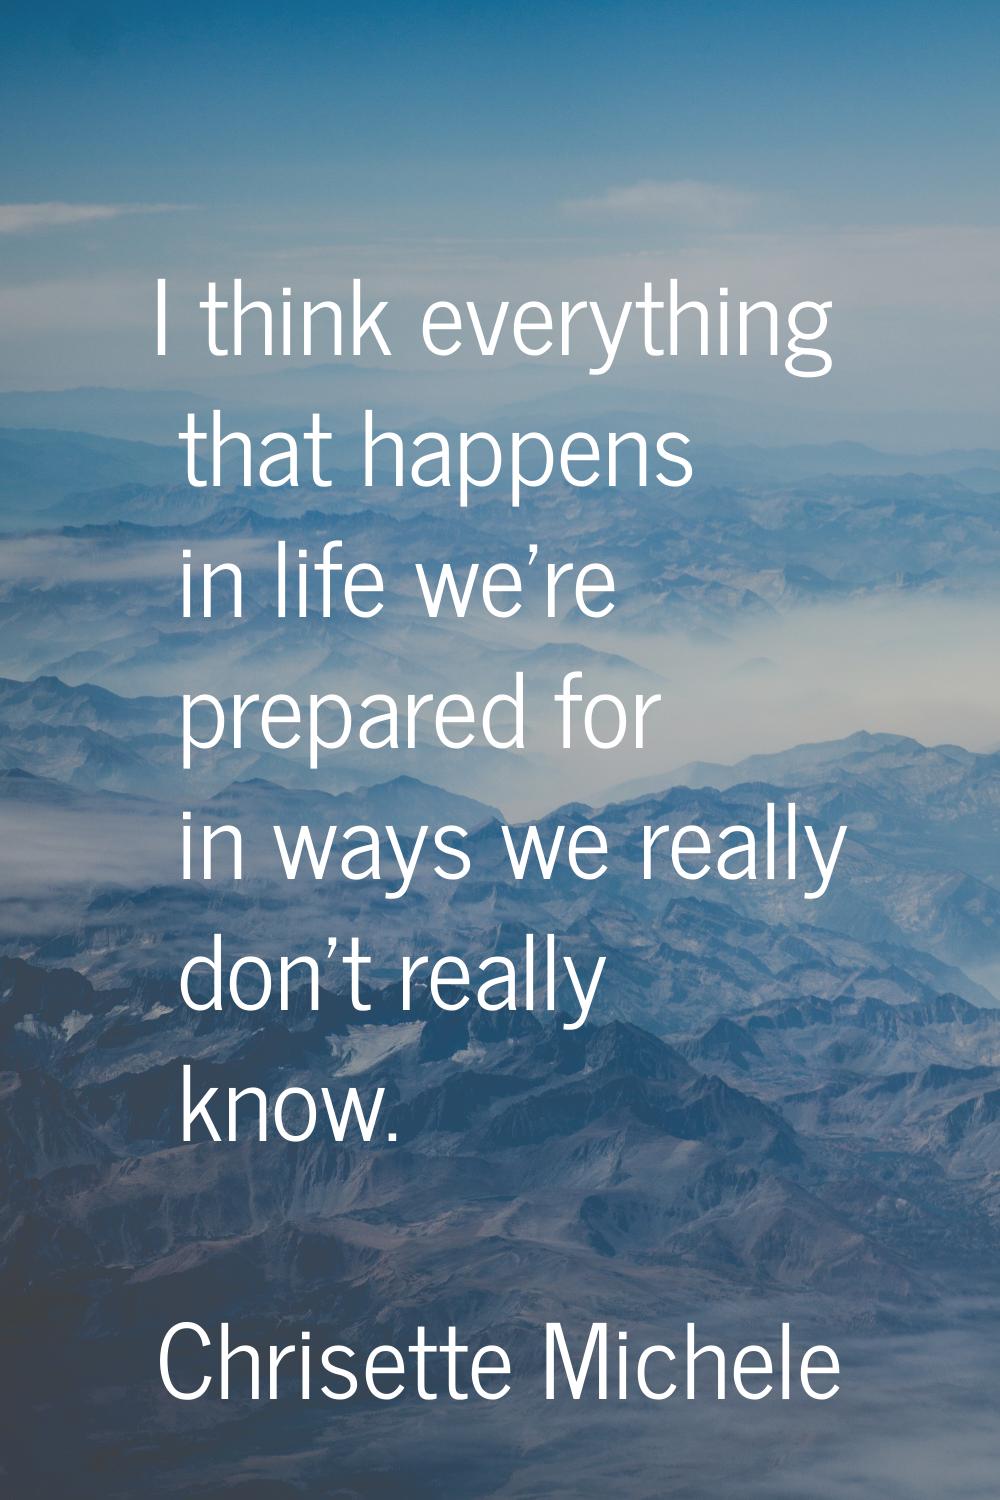 I think everything that happens in life we're prepared for in ways we really don't really know.